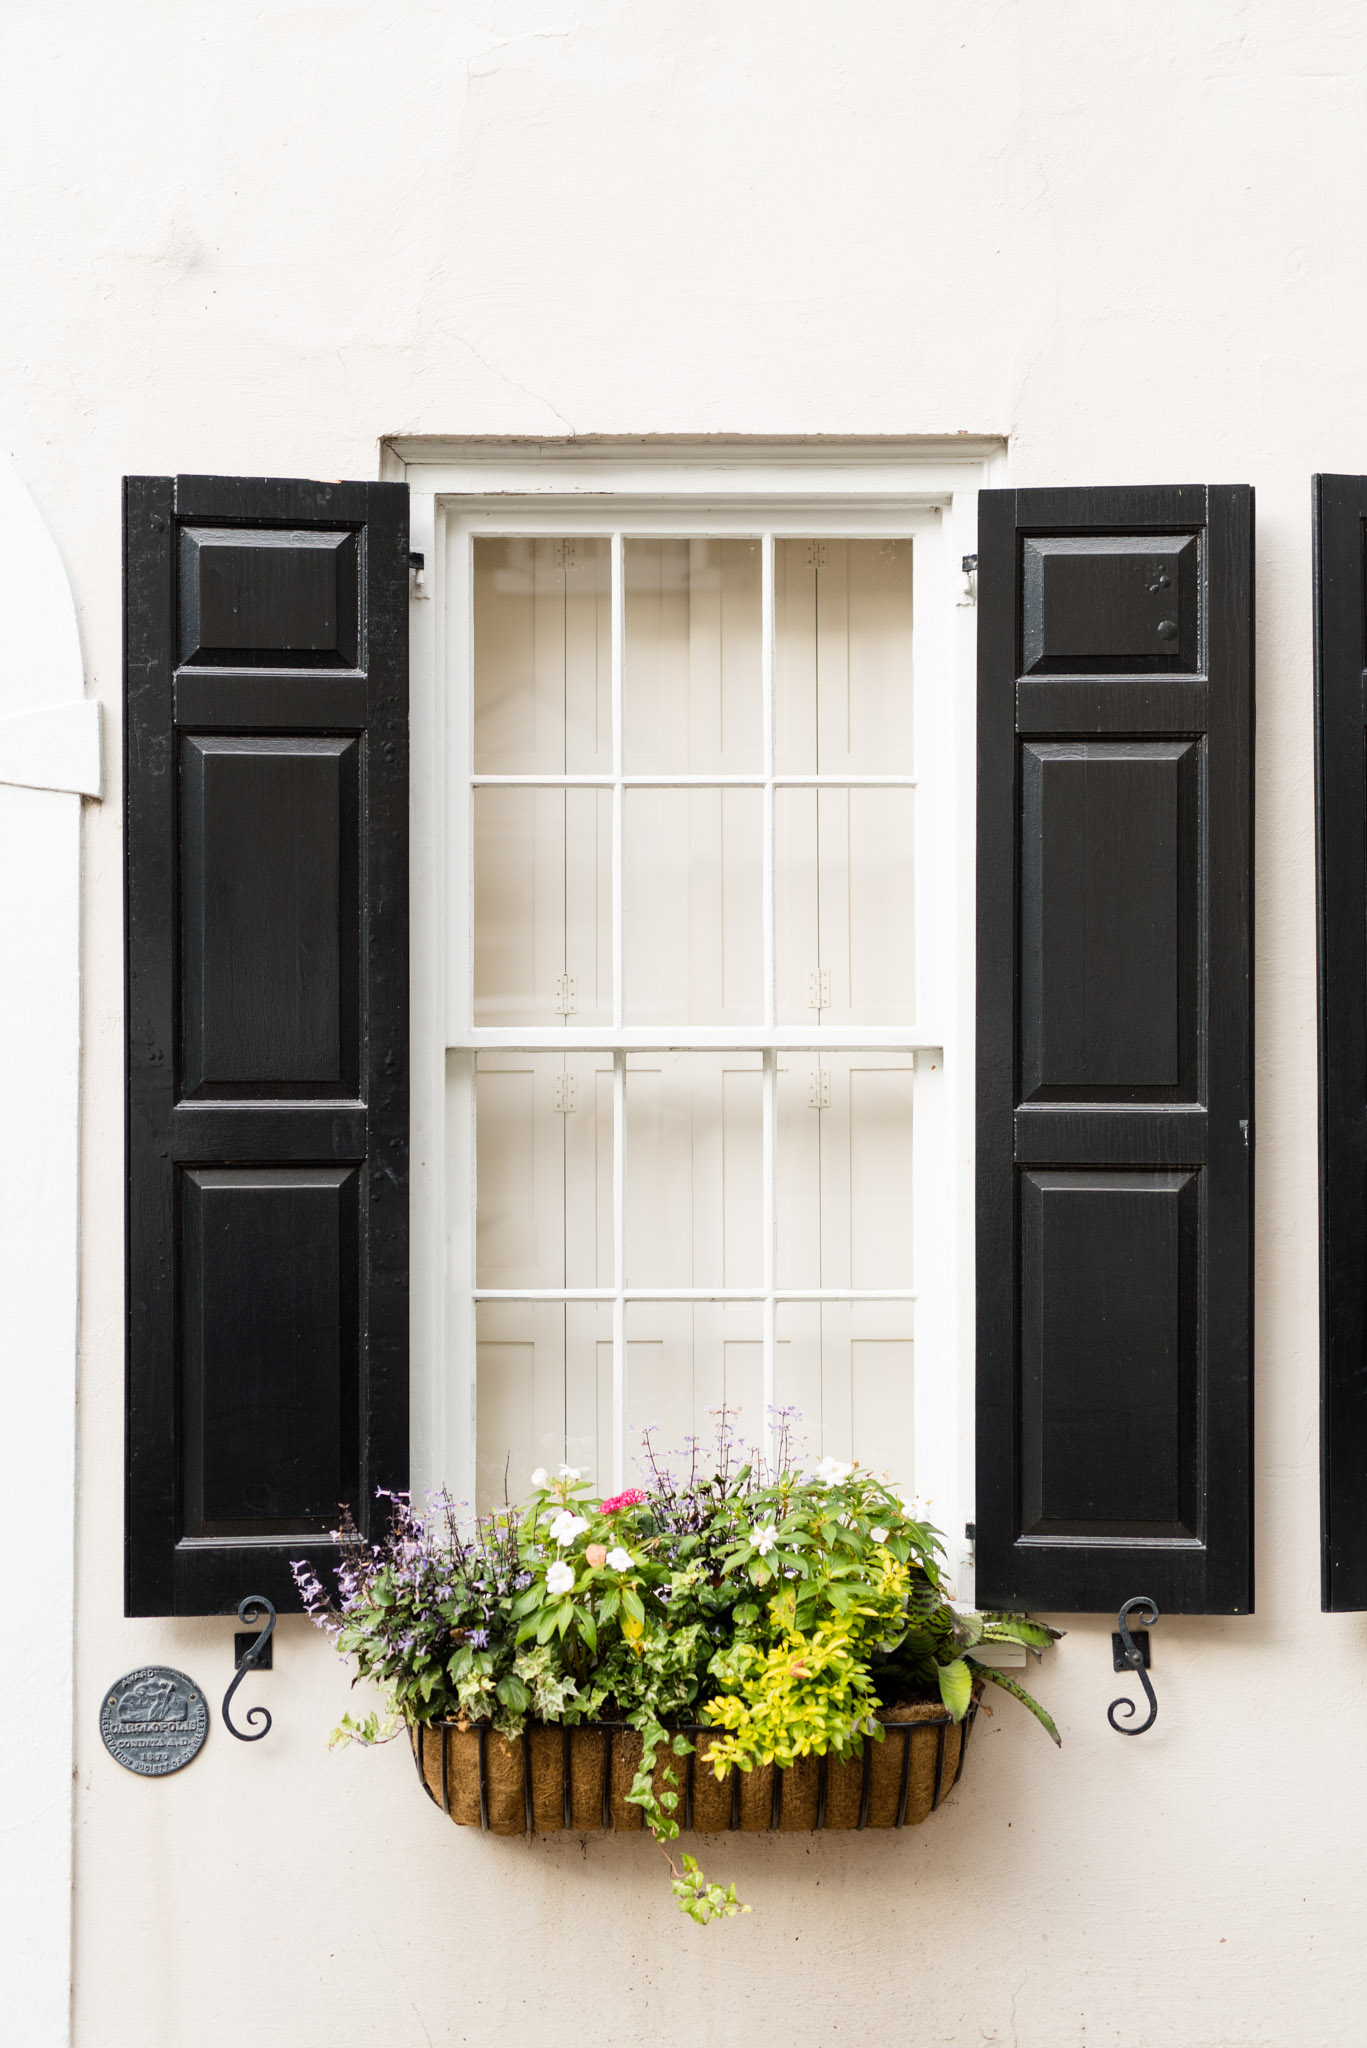 Black shutters on white window and wall